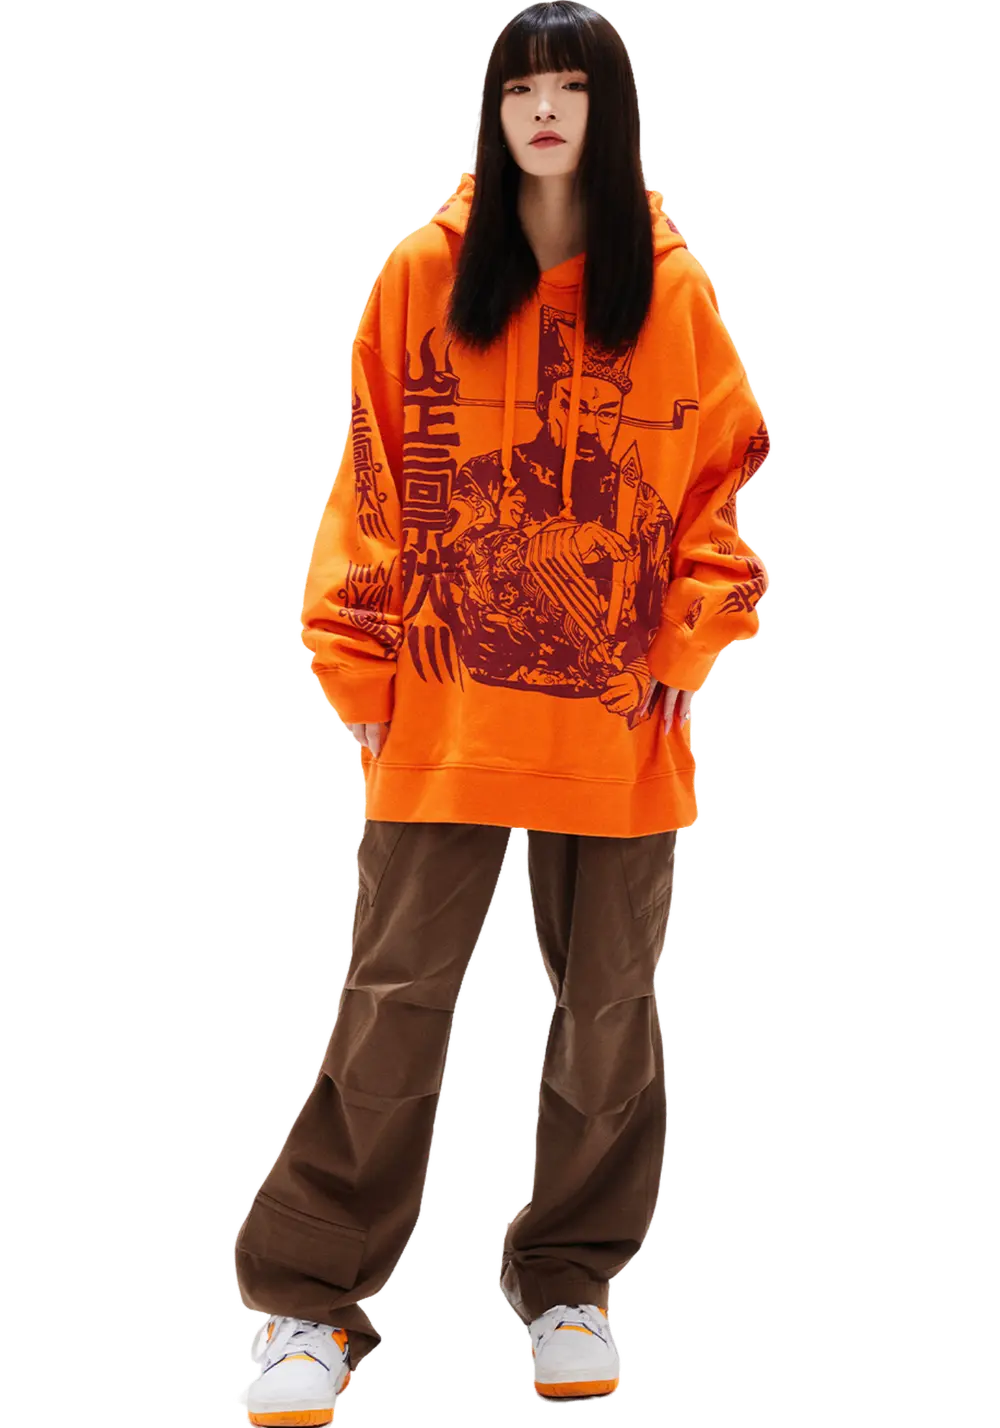 Flame Embroidered Logo Hoodie - PSYLOS 1, Flame Embroidered Logo Hoodie, Hoodie, Burnin, PSYLOS 1